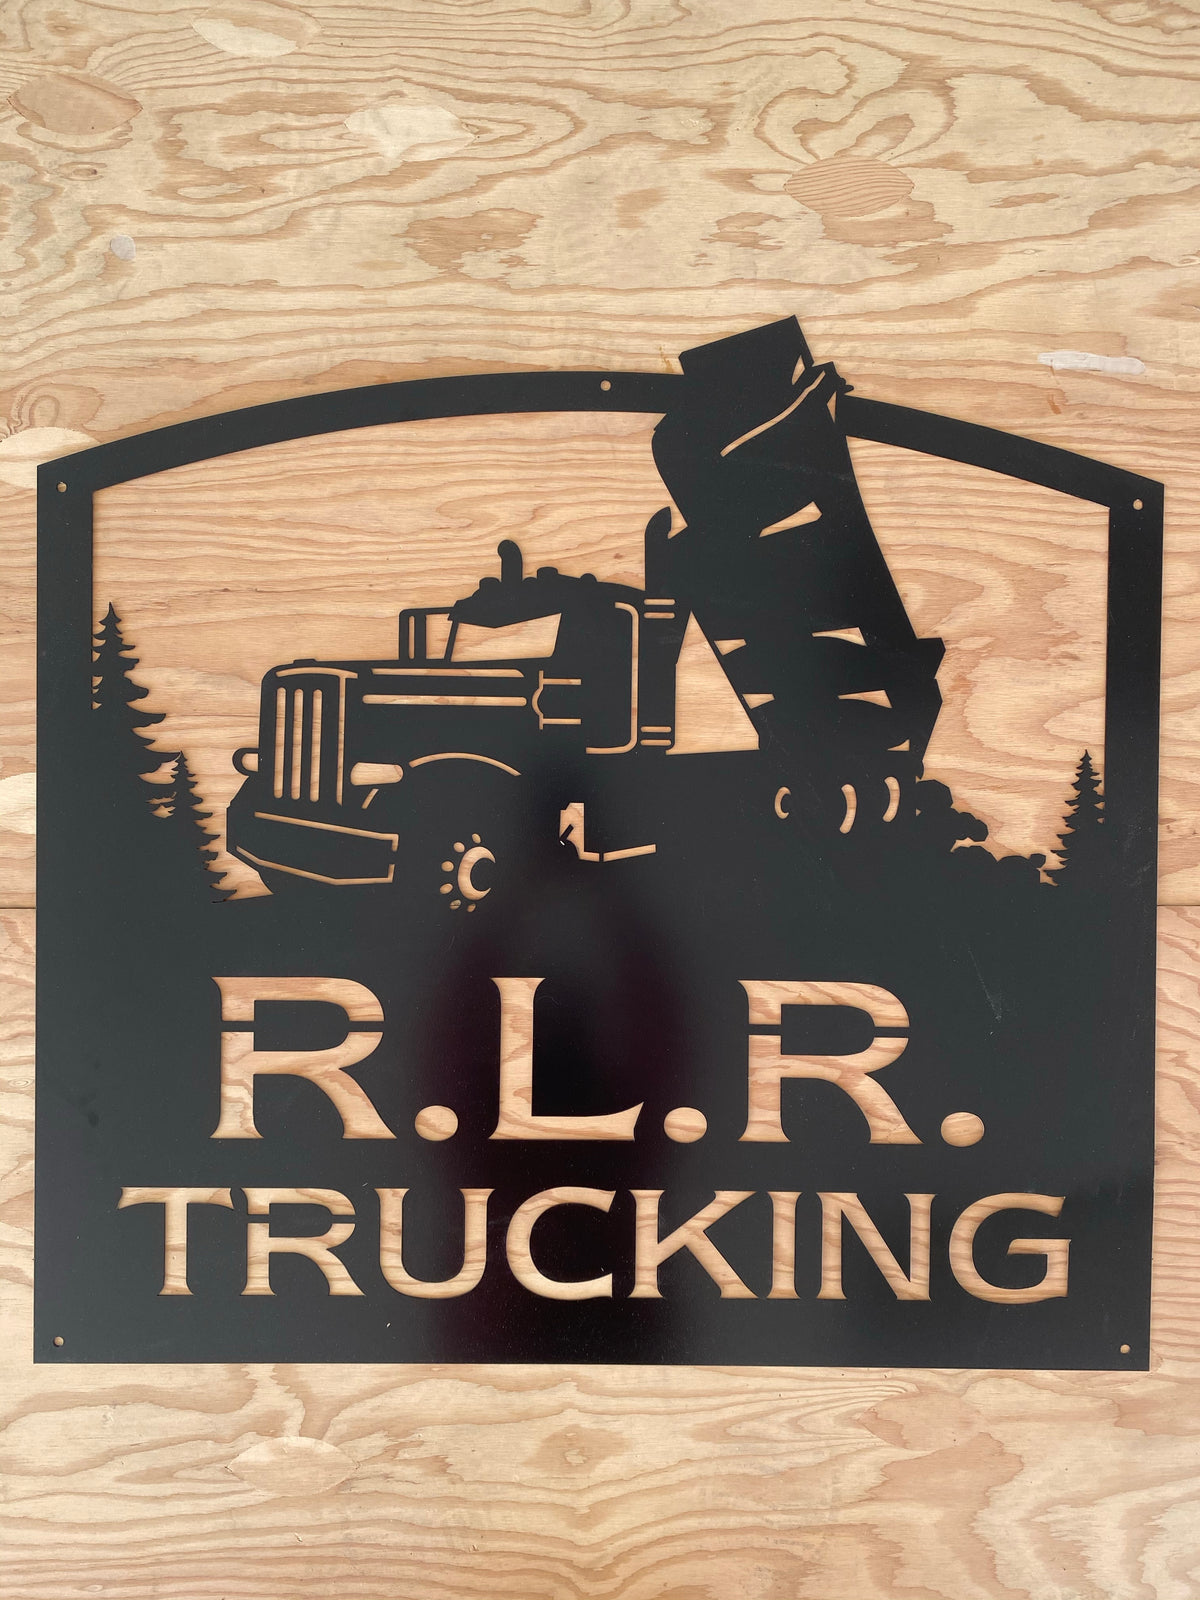 Dump Truck Pete - Your Text Here - Metal Wall Art  - Free Shipping